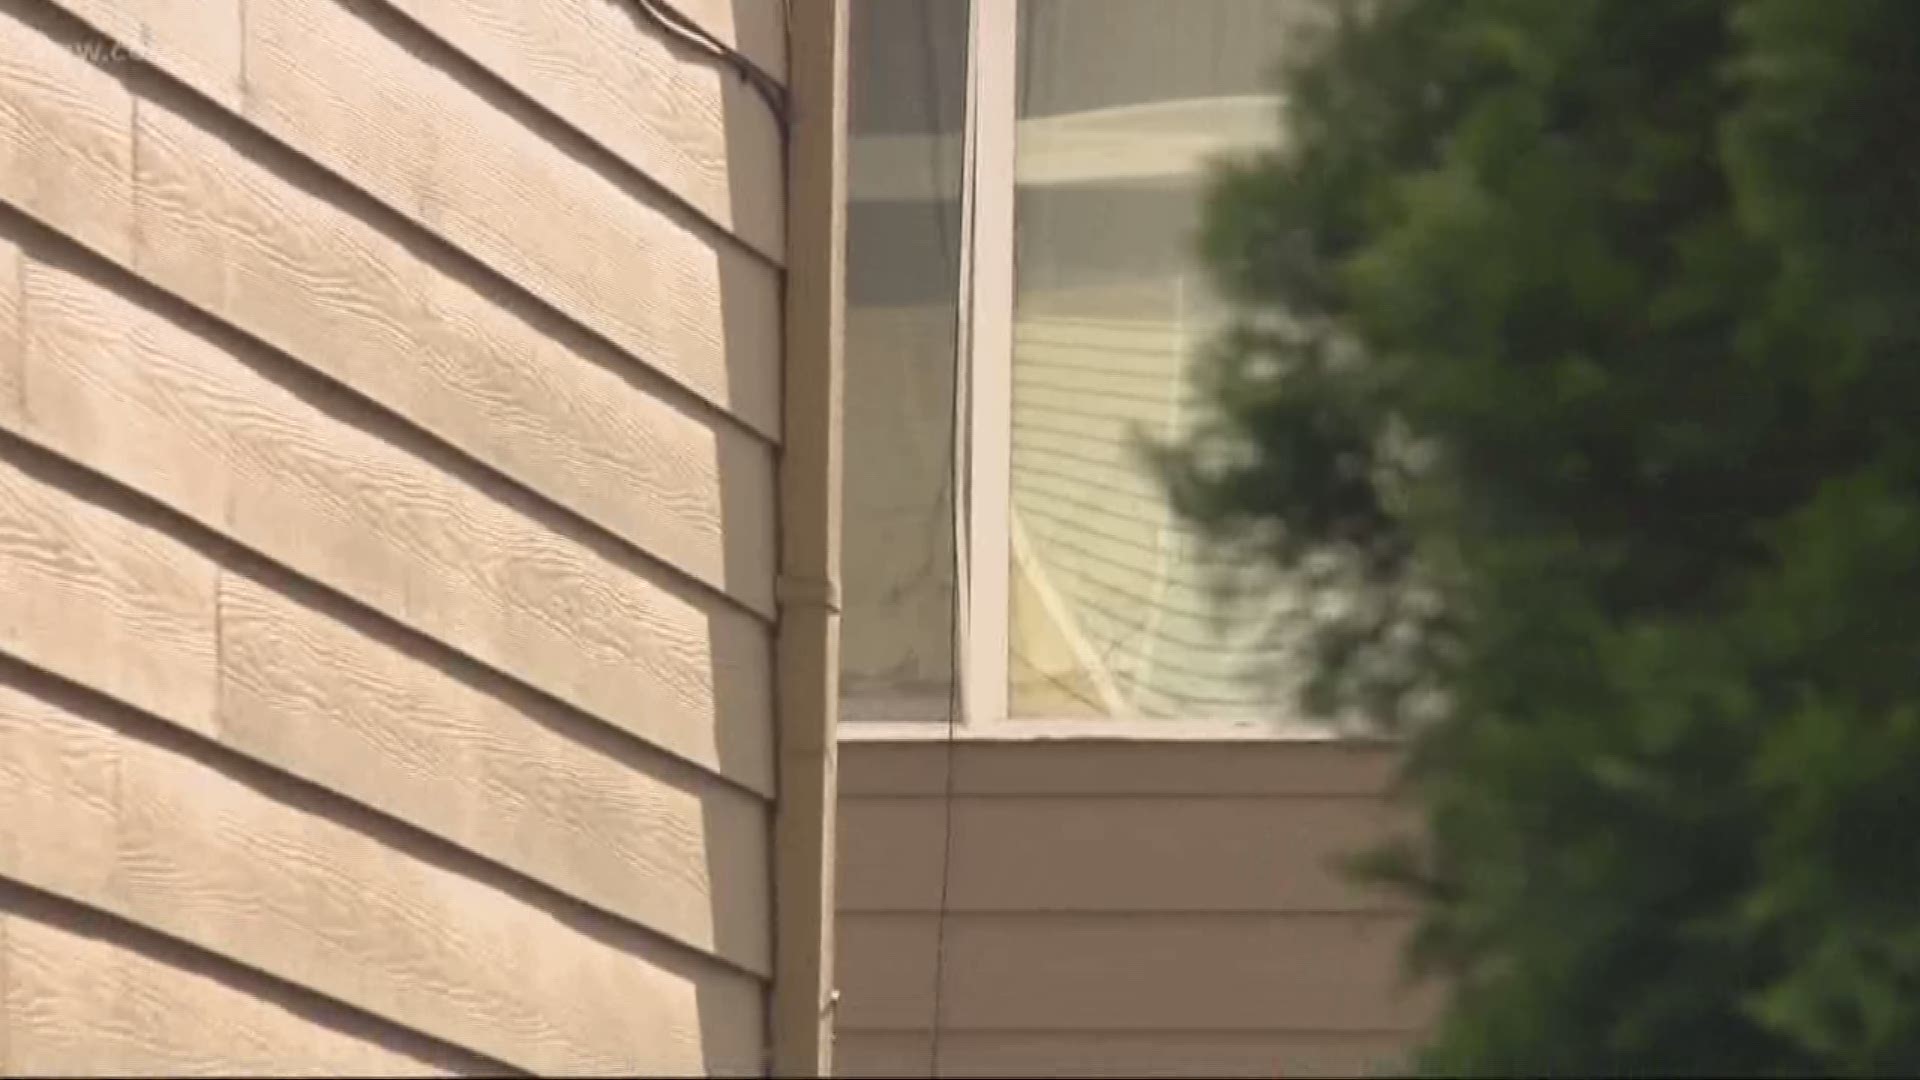 Boy hurt after fall from 2nd story window